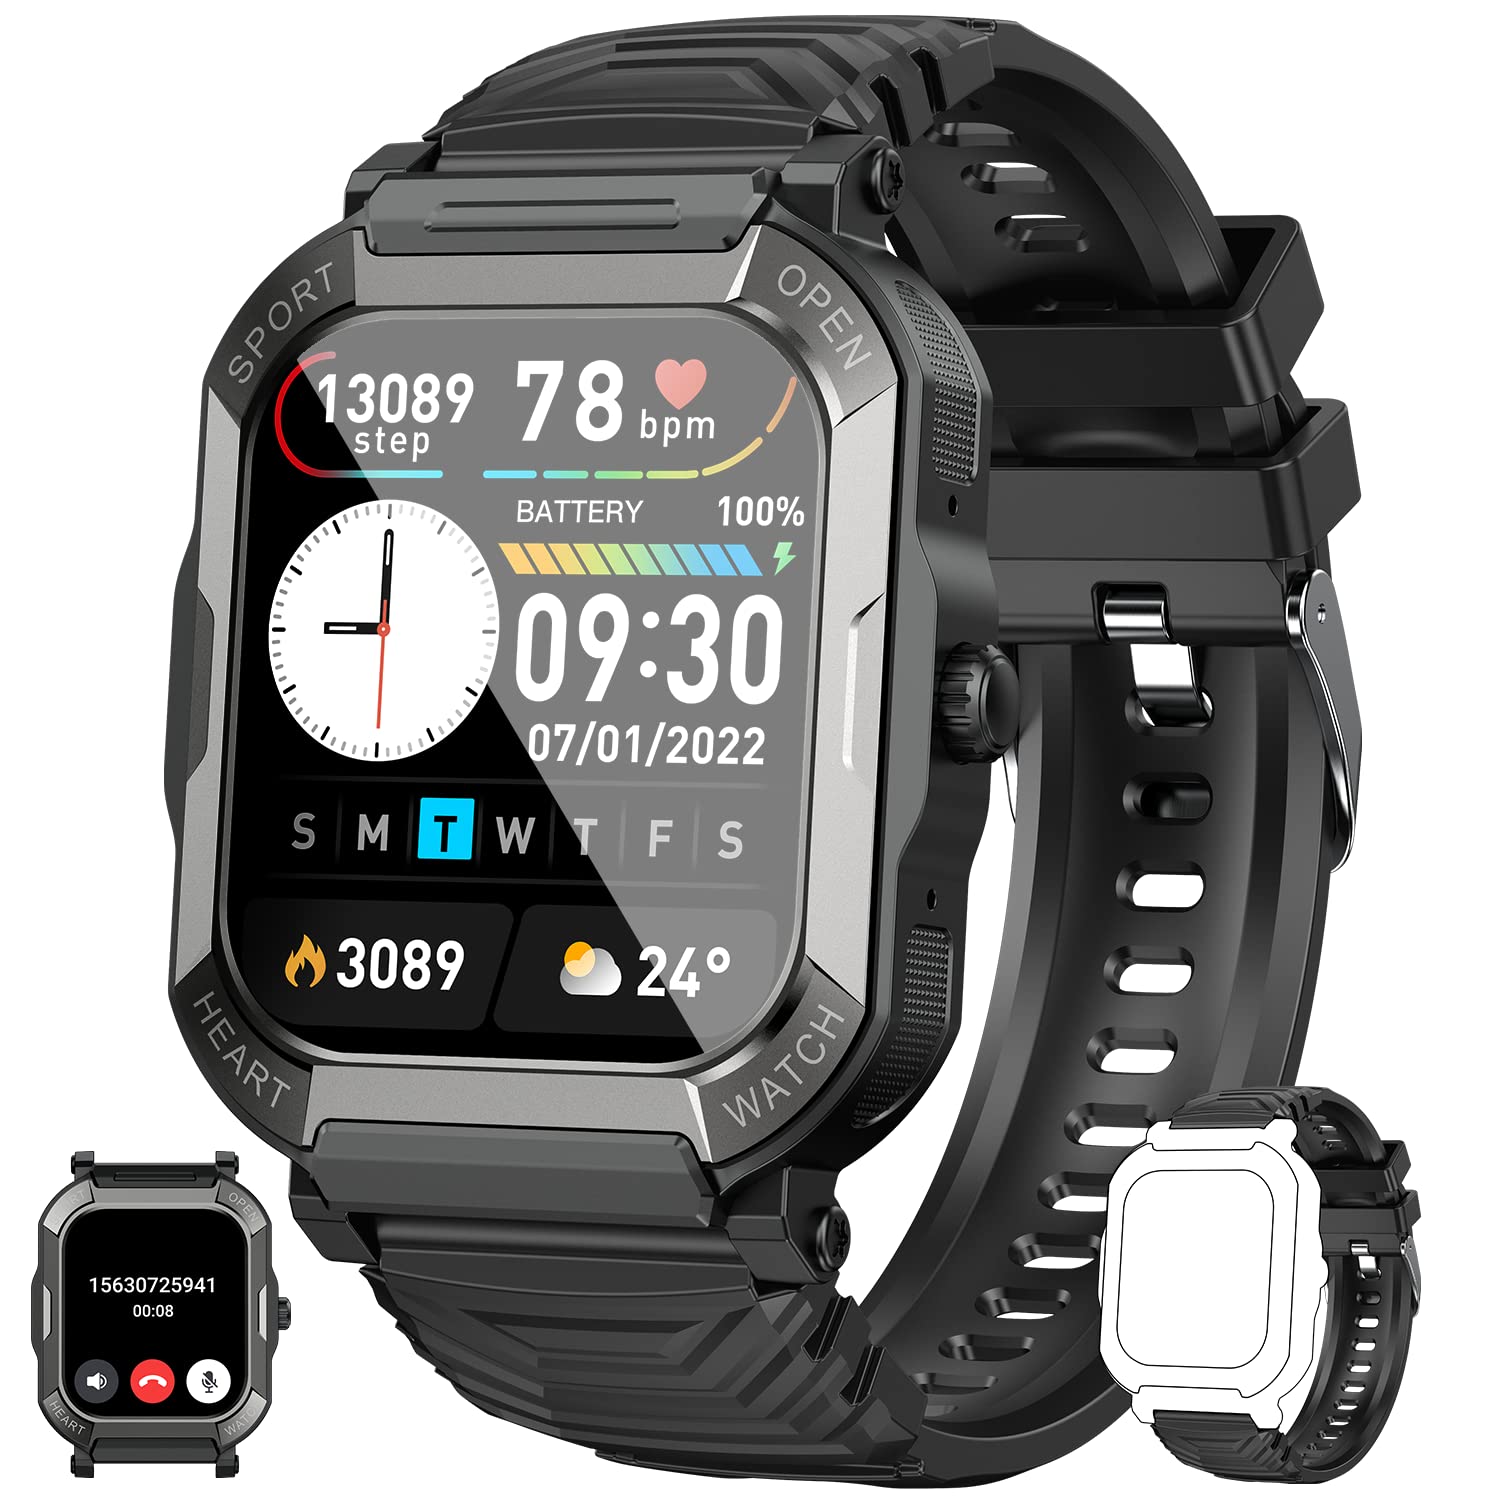 Waterproof Smartwatch for Men with Heart Rate Blood Pressure Sleep Monitor  and Multi-Sport Modes - Fitness Tracker for Android iOS